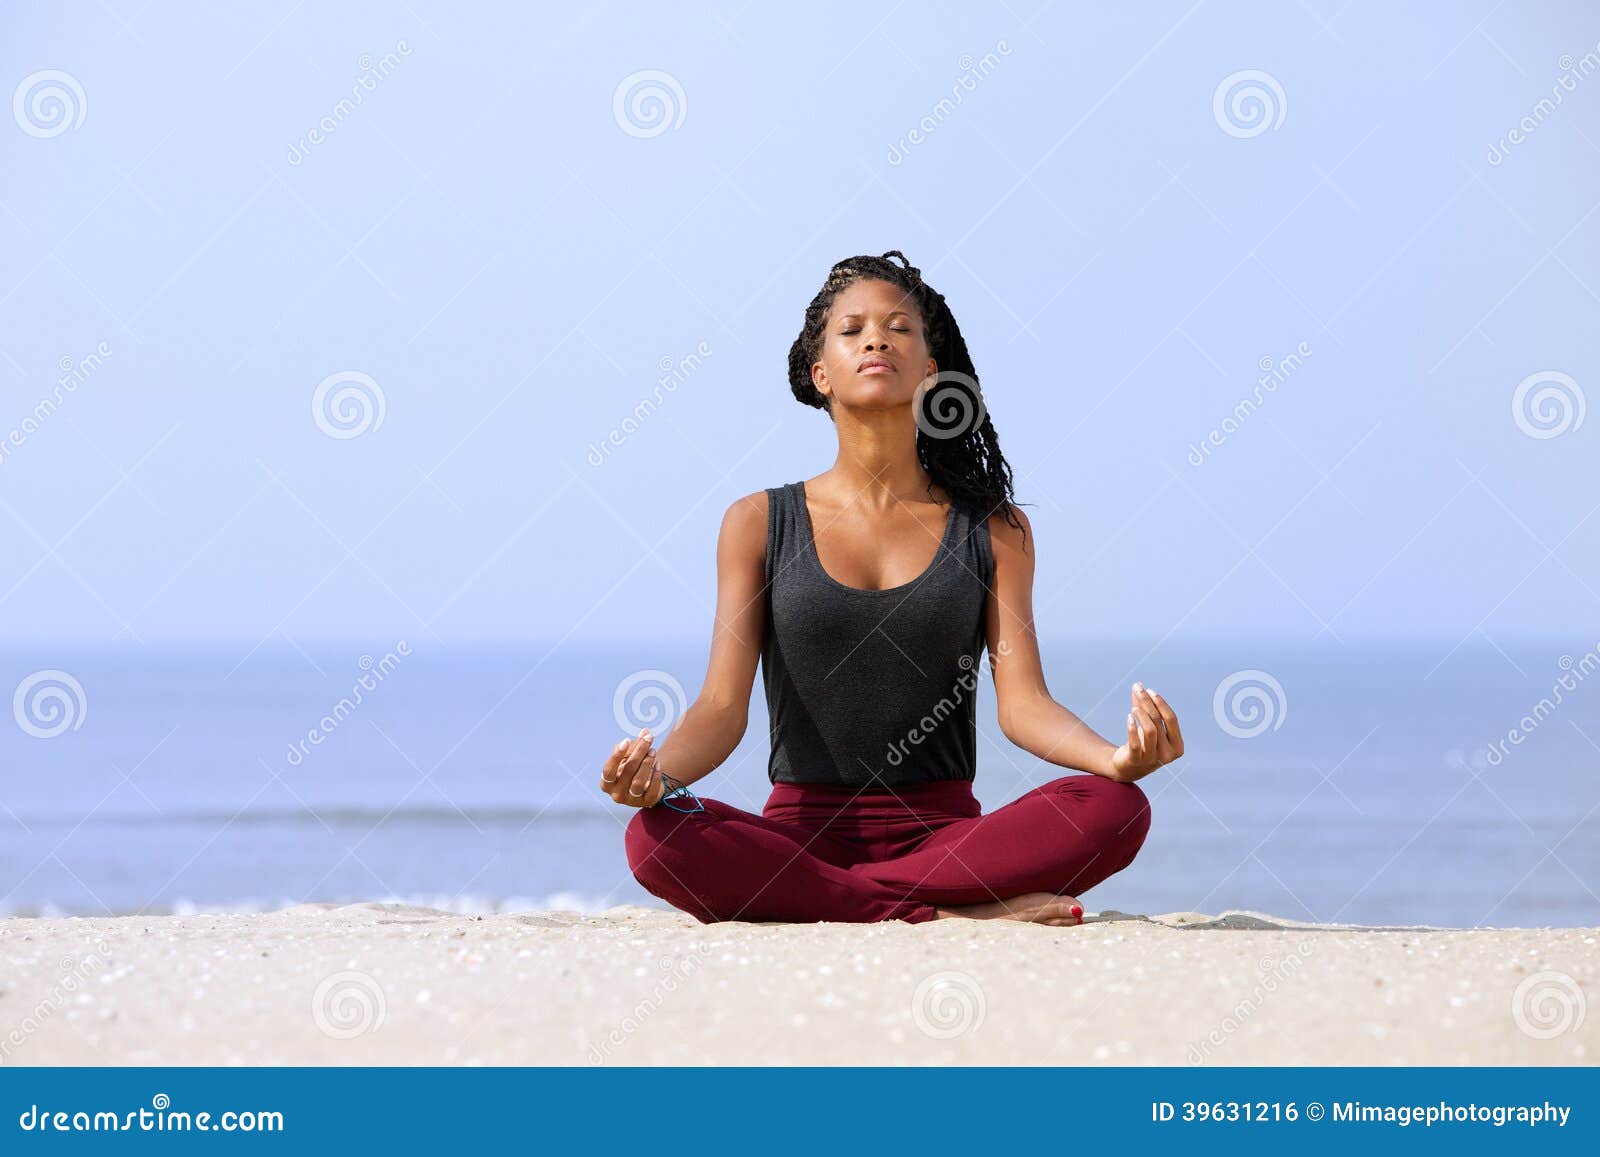 Free: Woman Sitting on Table - nohat.cc